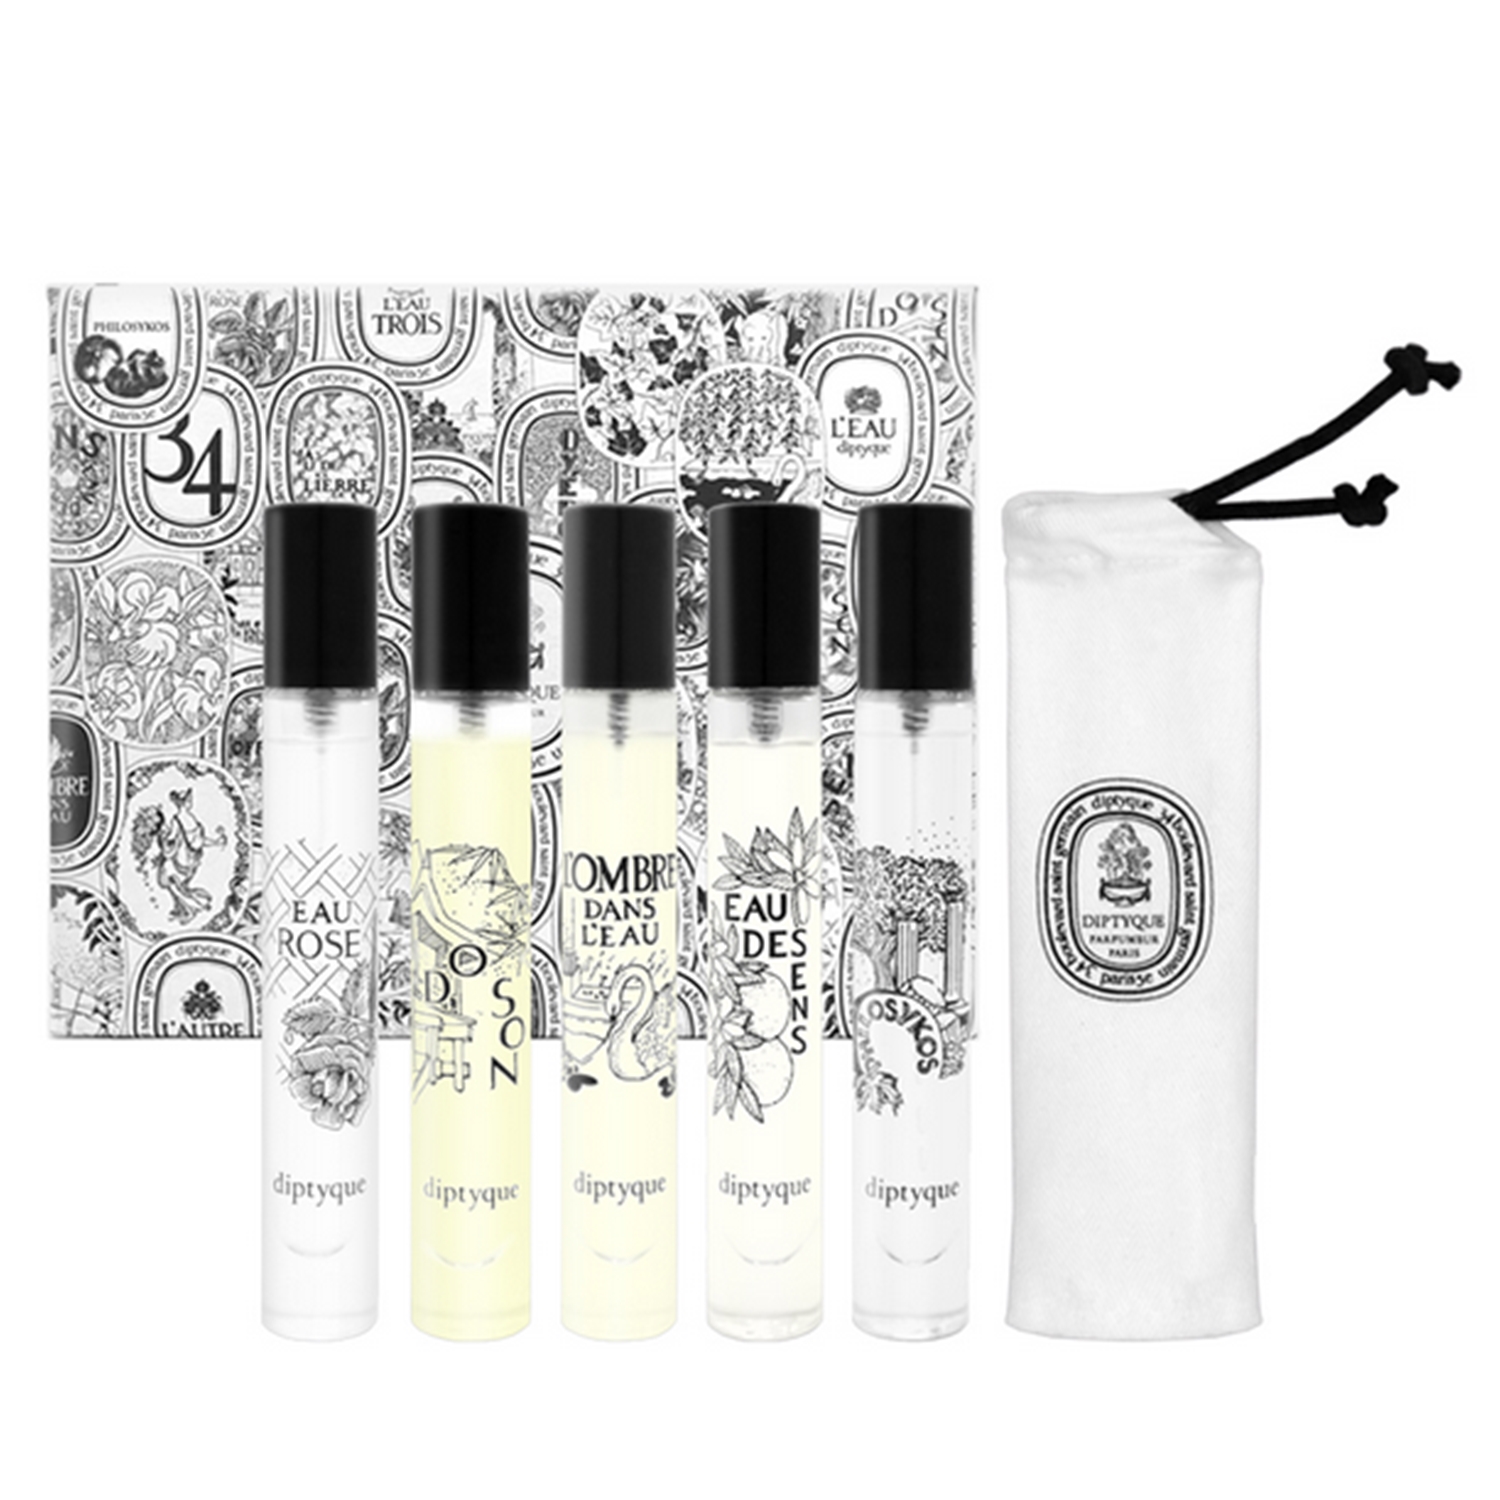 Diptyque Discovery Set Of 5 Unisex - Indo Fragrance